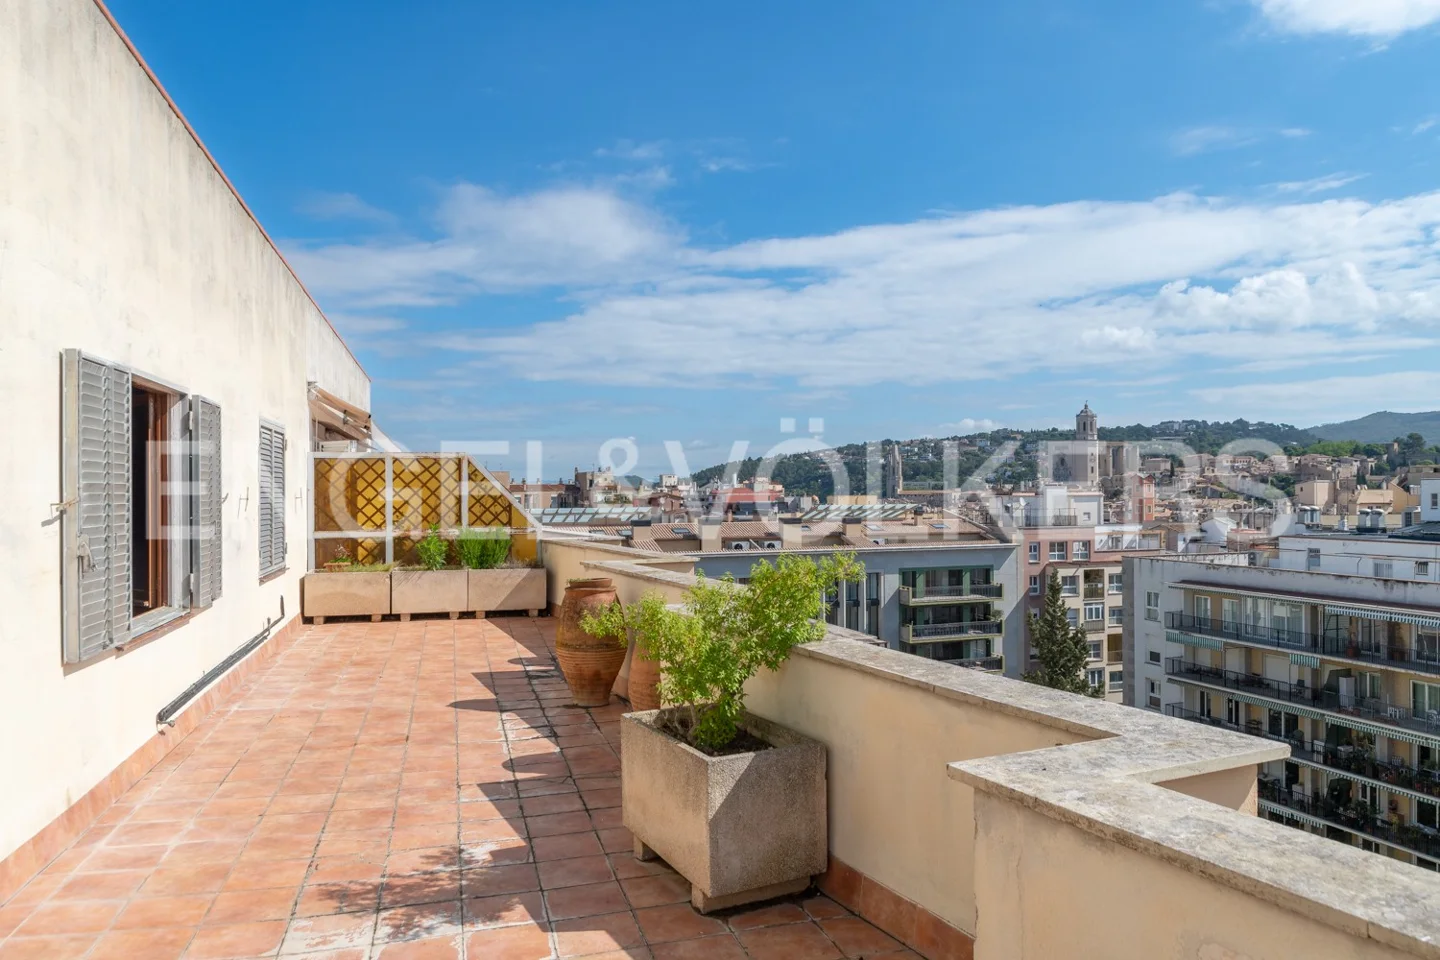 Penthouse to reform in the center of Girona